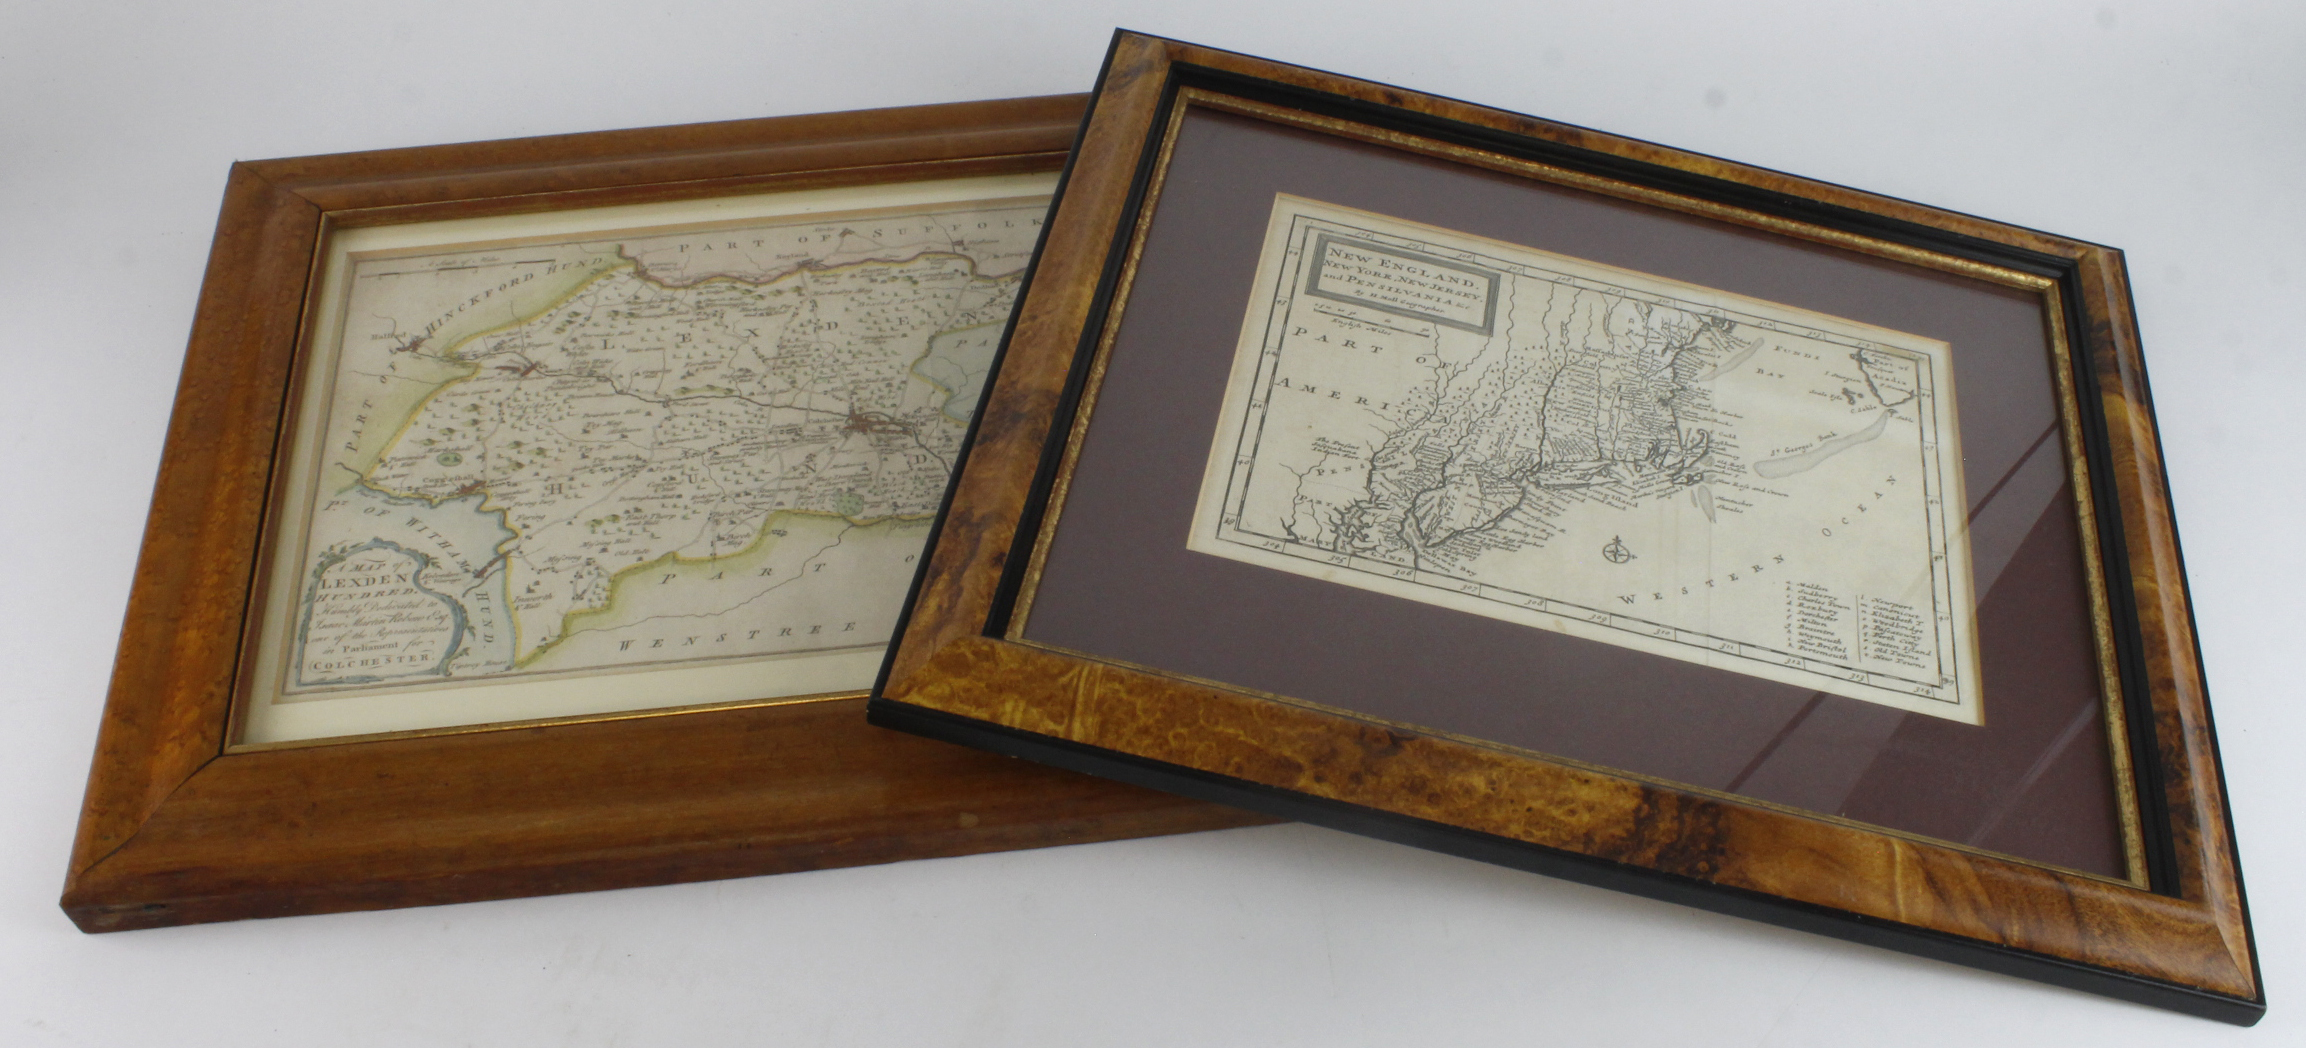 Maps. Two engraved maps, comprising 'A Map of Lexden Hundred, Humbly Dedicated to Isaac Martin Rebon